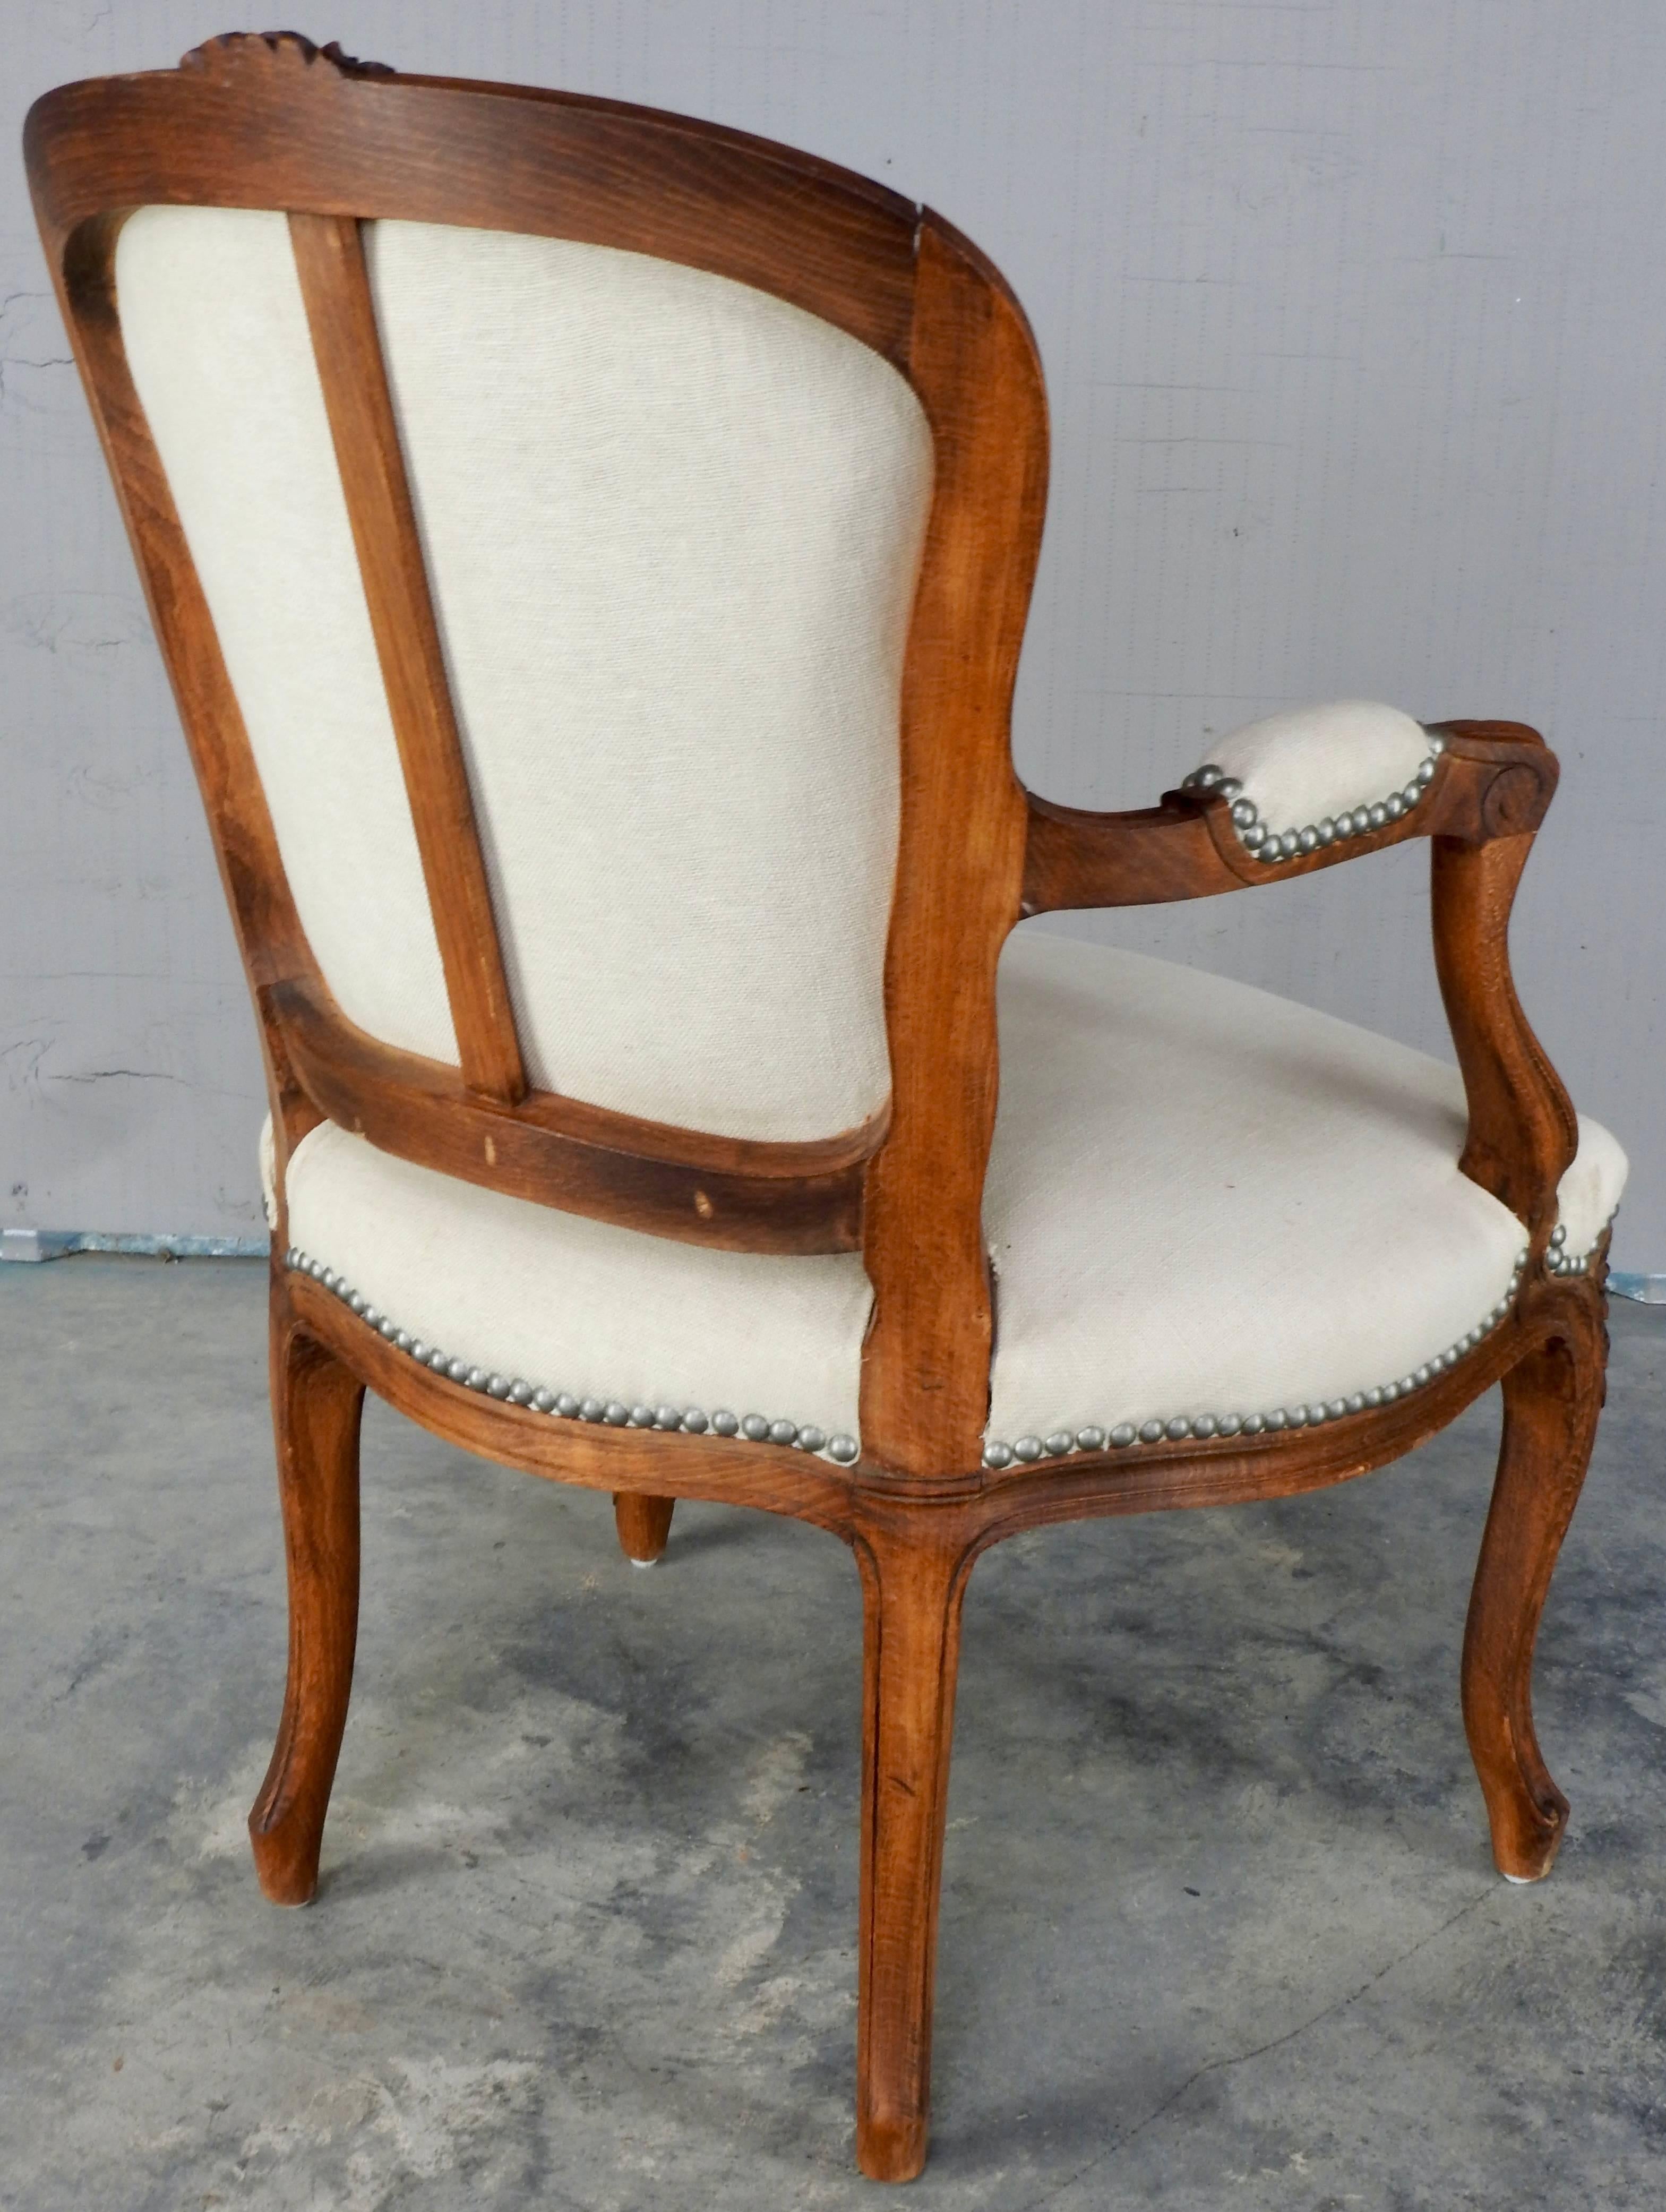 This chair is a beautiful warm walnut in the traditional Rococo style. Covered in a gorgeous Belgian linen this chair will add warmth and texture to any room. Pewter tacks make the linen pop out.